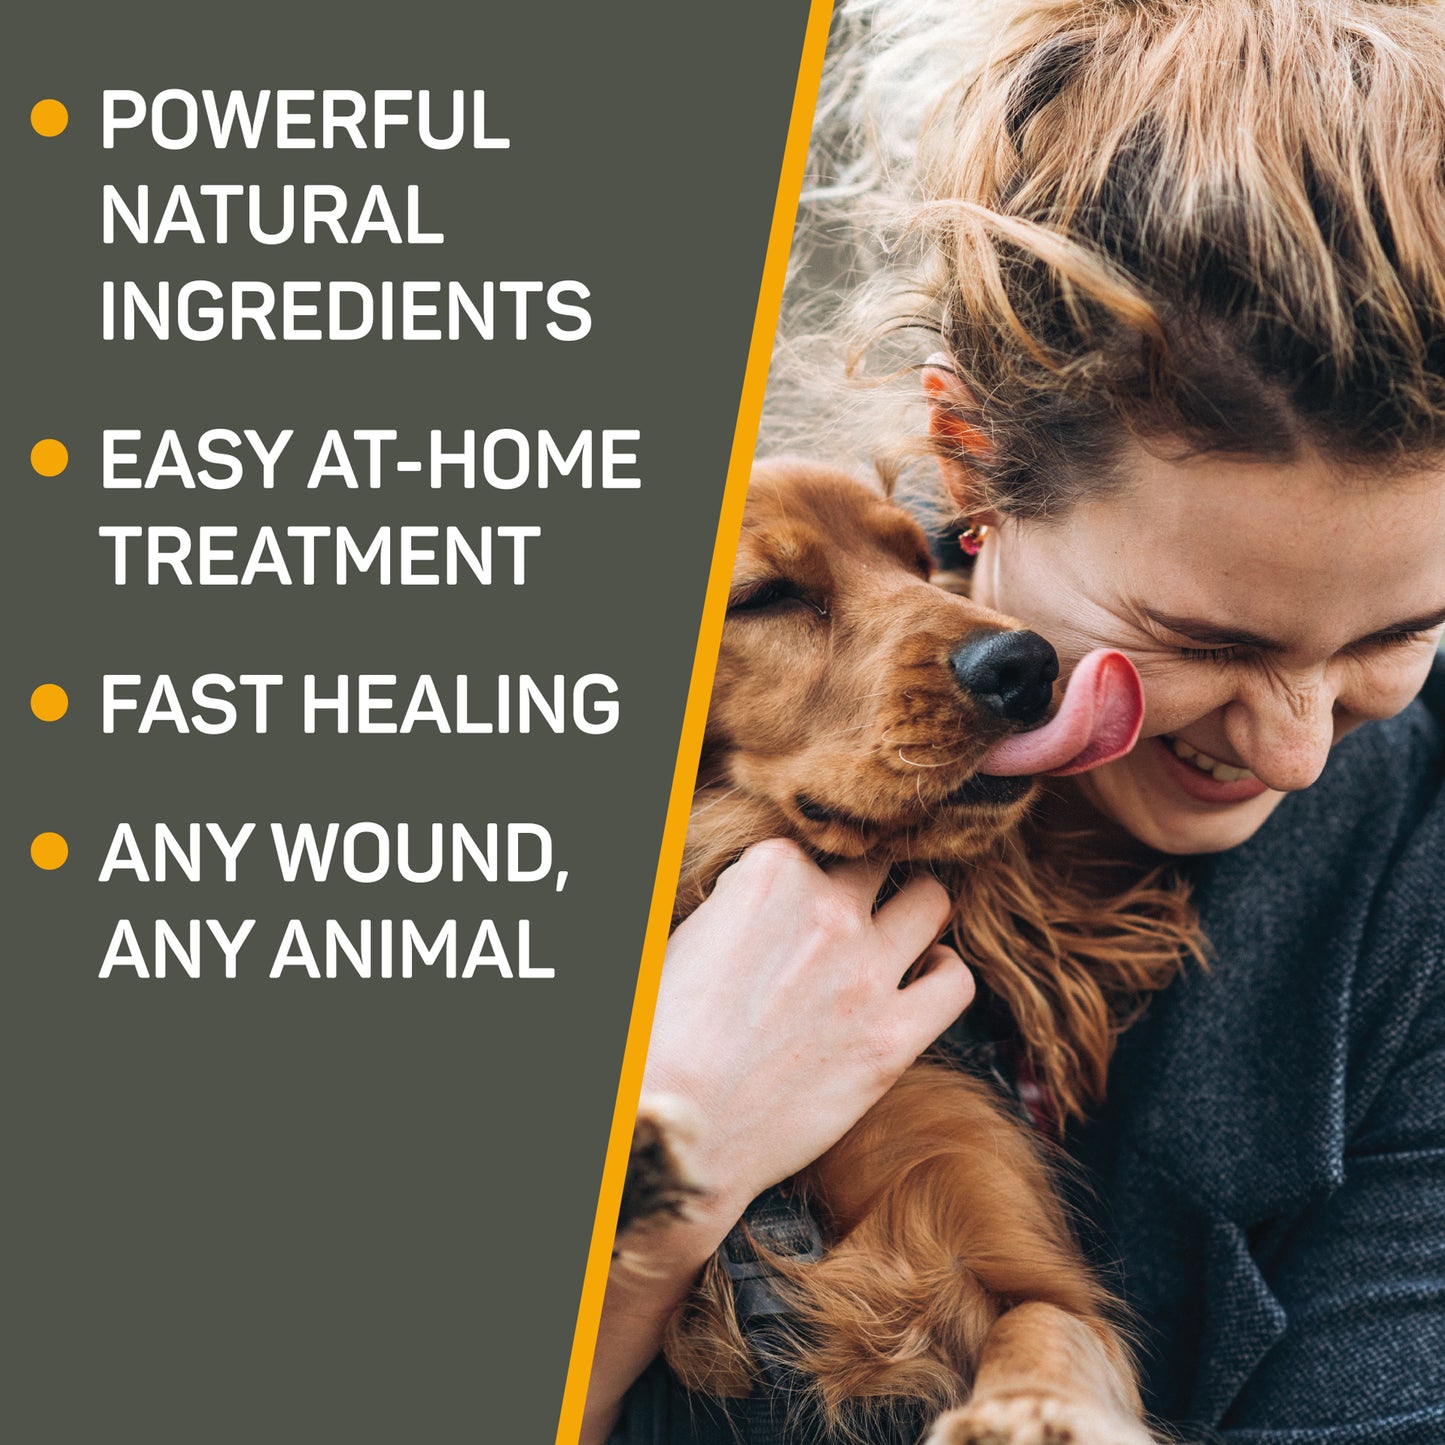 Golden Retriever dog licking the face of her owner. Powerful natural ingredients, easy at-home treatment, fast healing, any wound, any animal.